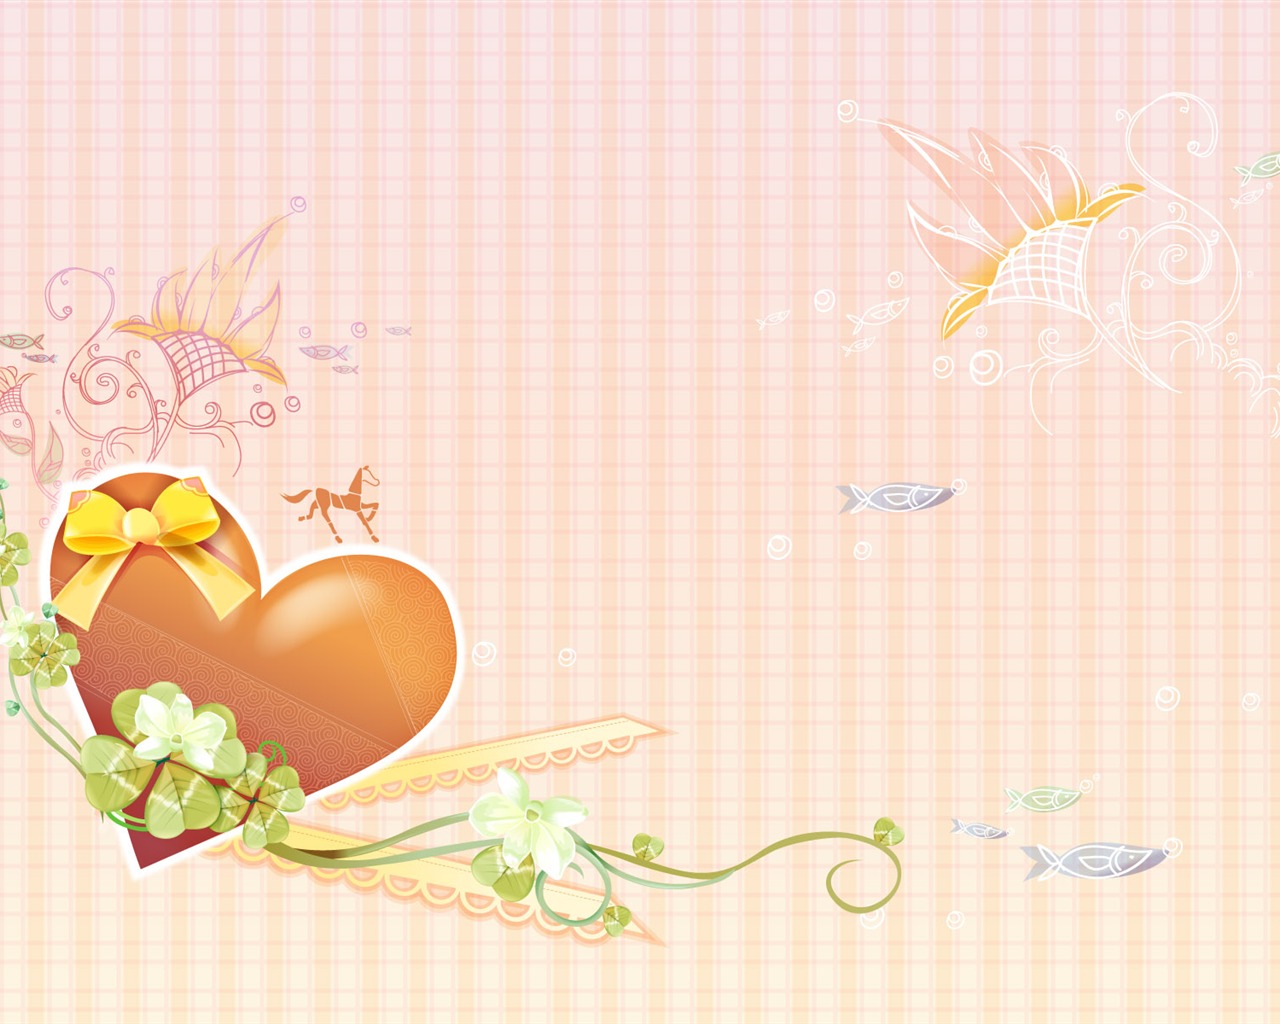 Valentine's Day Love Theme Wallpapers (3) #16 - 1280x1024